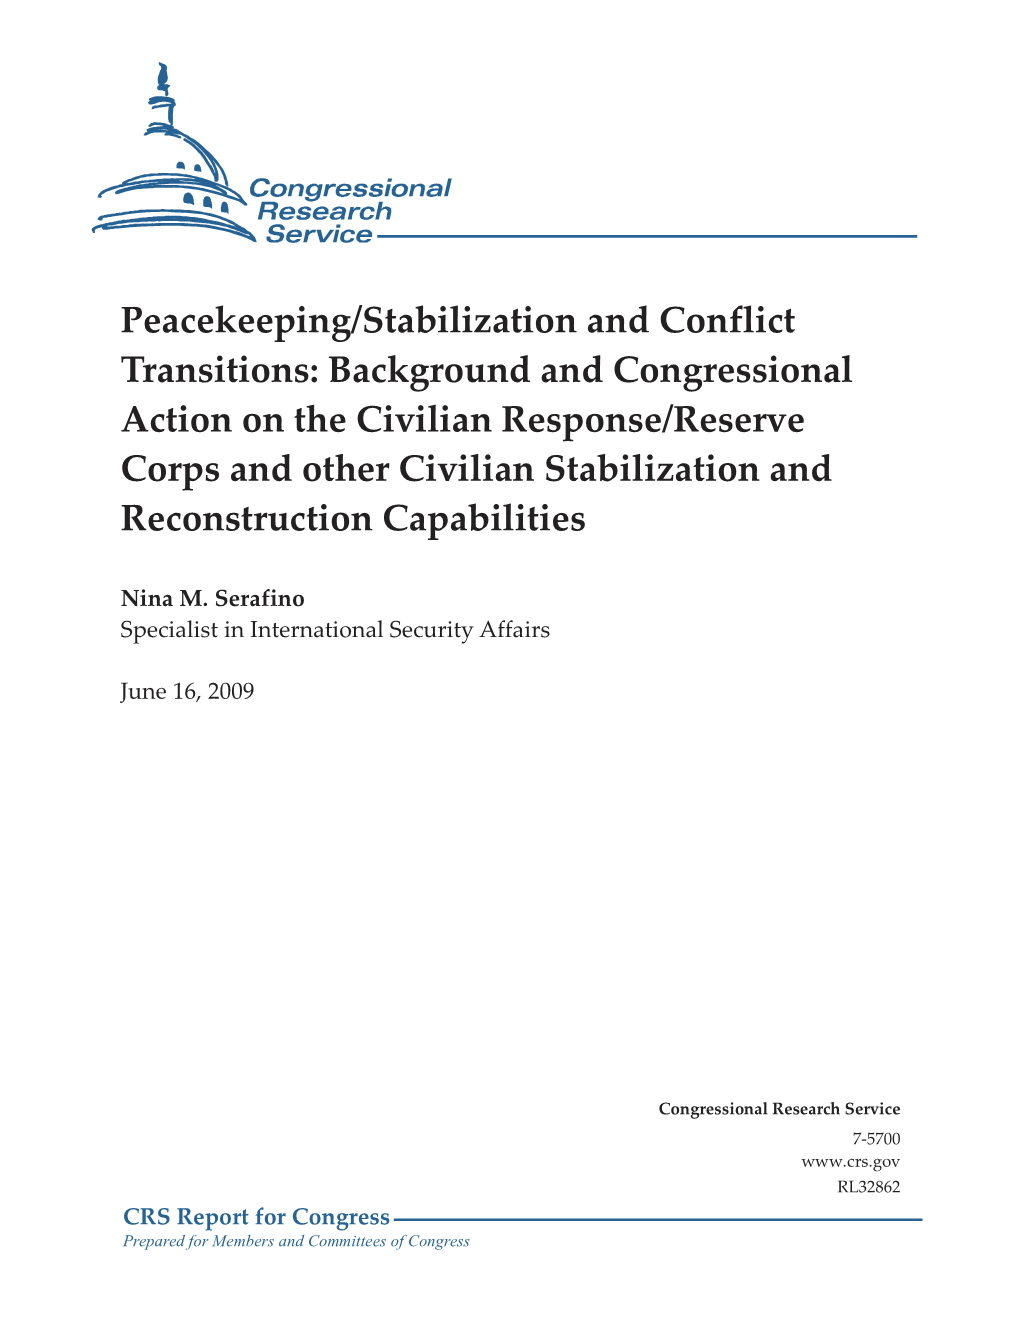 Peacekeeping/Stabilization and Conflict Transitions: Background and Congressional Action on the Civilian Response/Reserve Corps